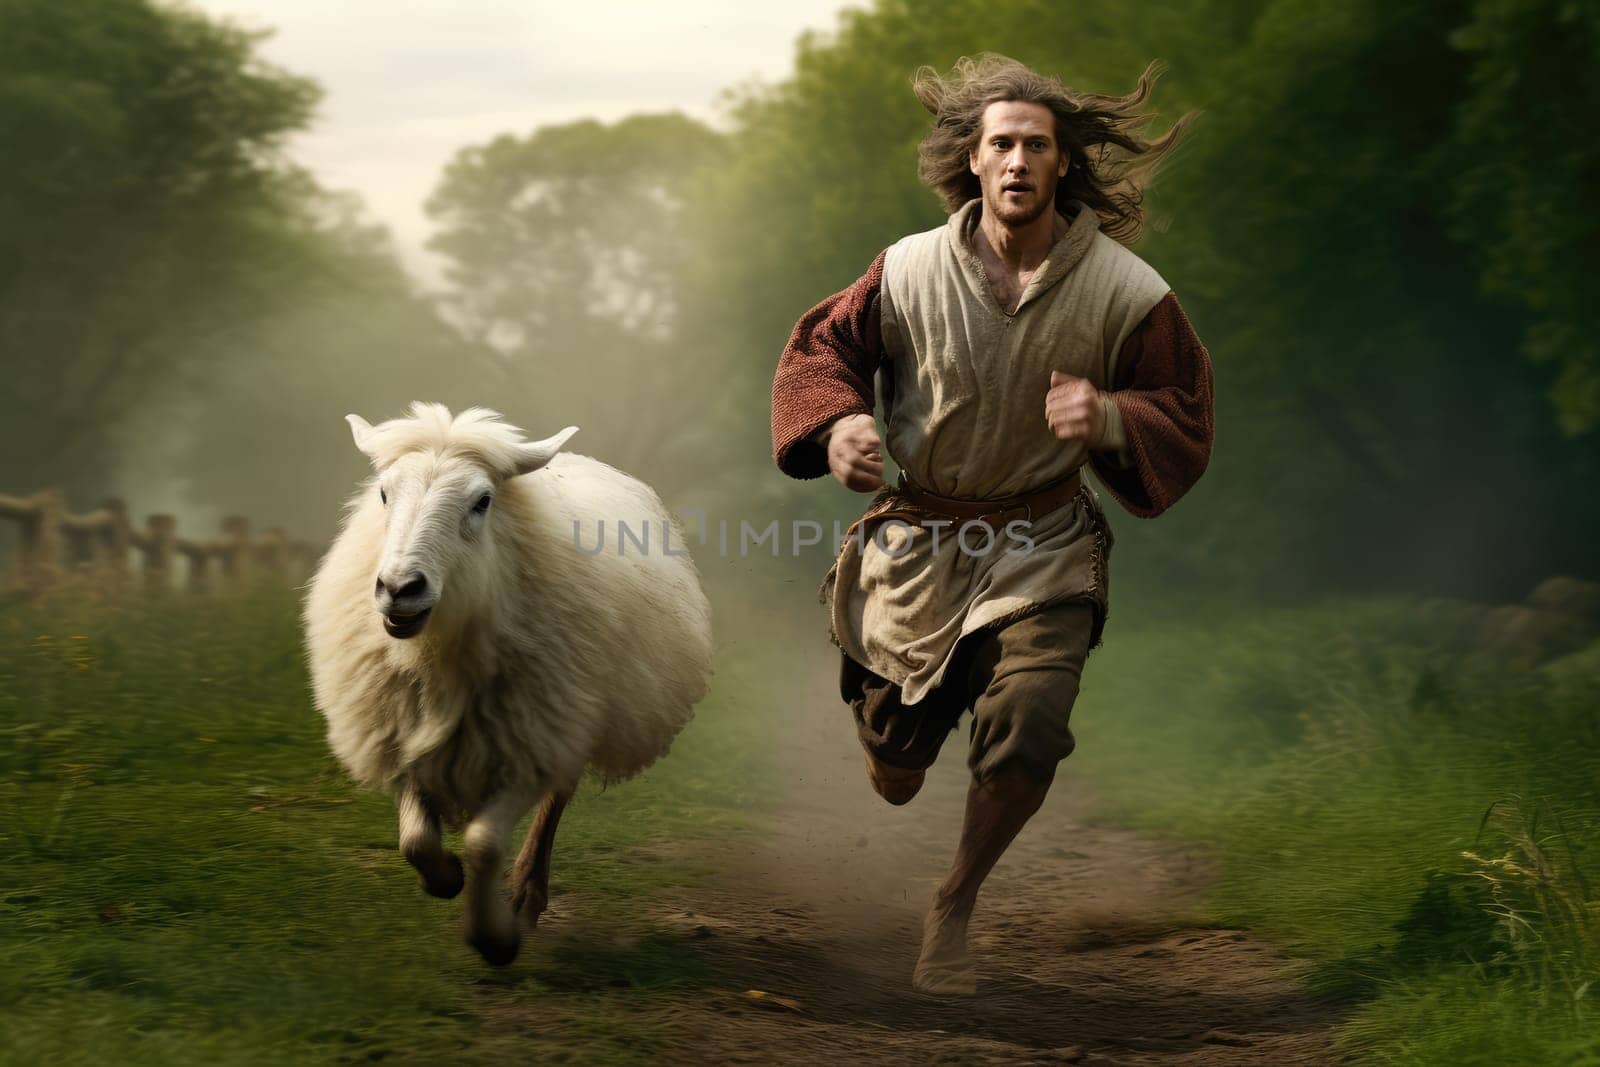 Man Jesus reaching out to a lost sheep. Religious theme concept by troyan